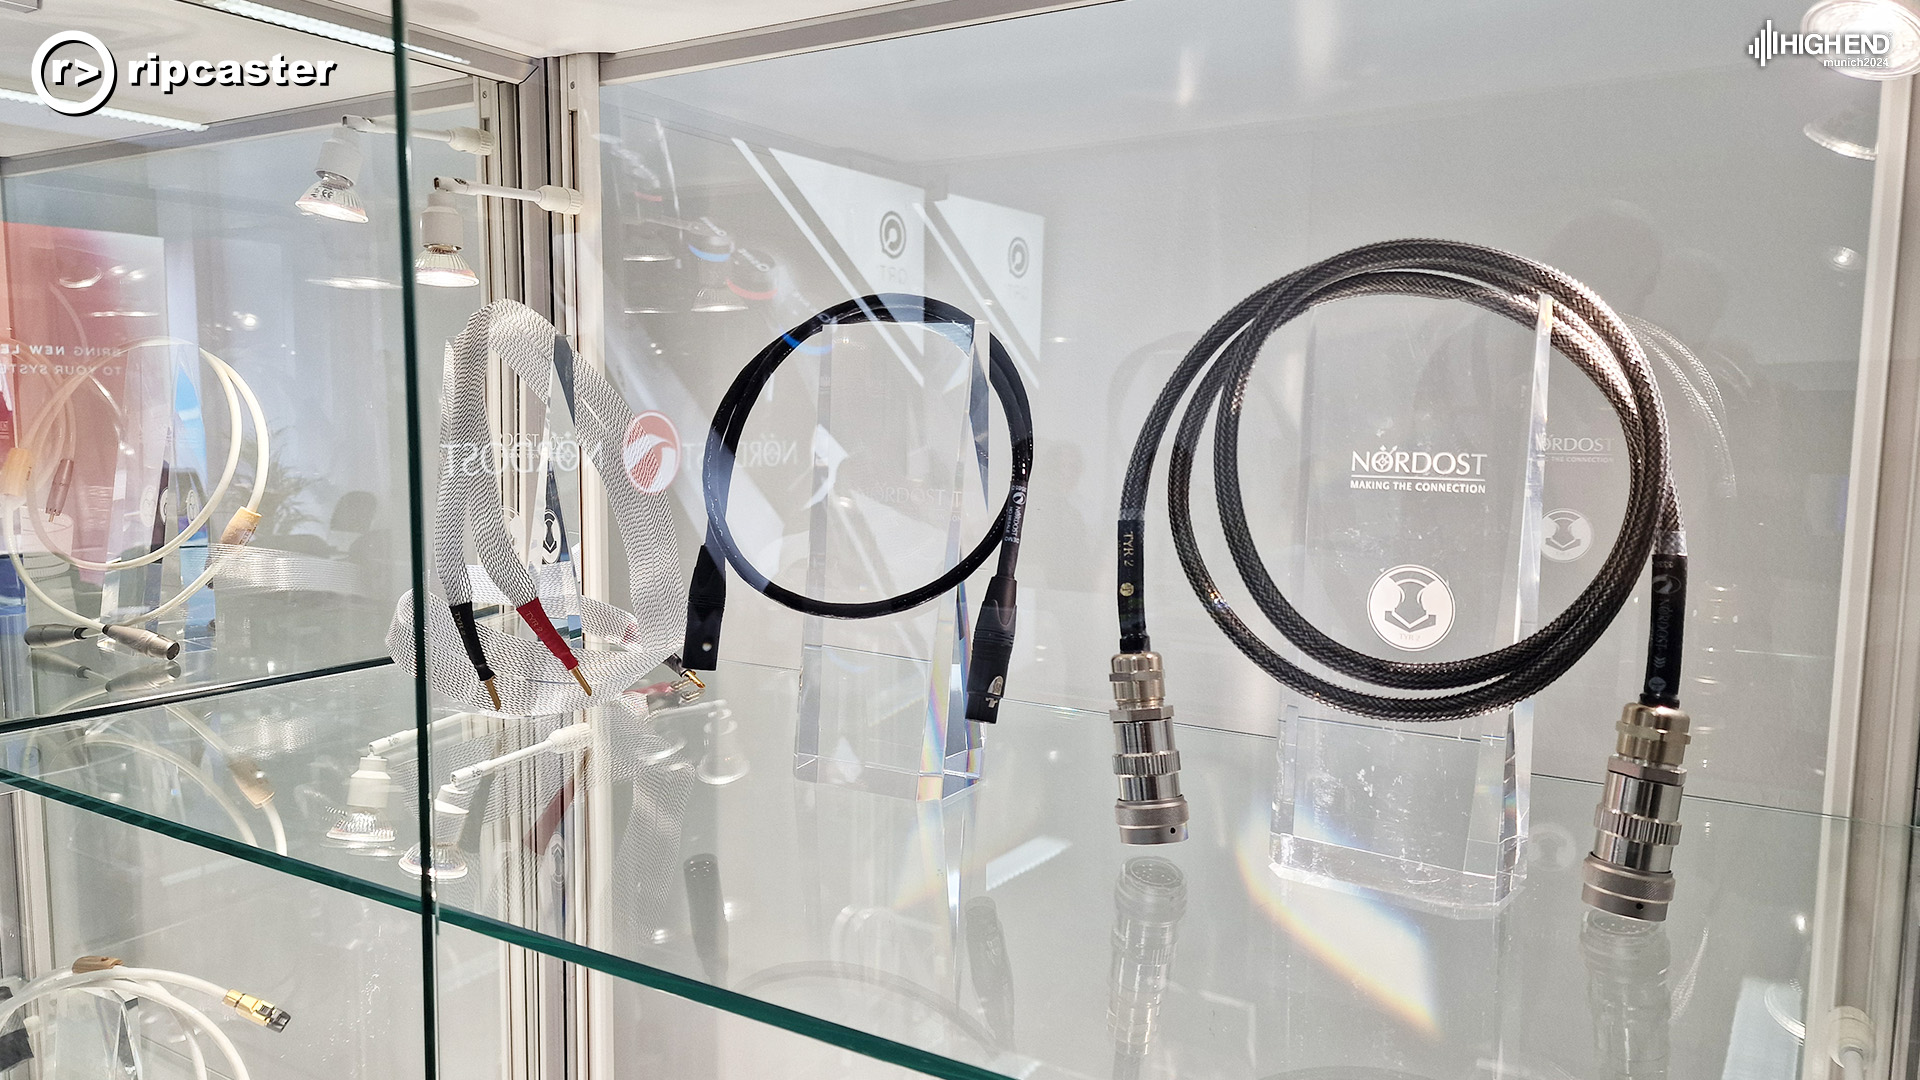 Nordost cables in a glass cabinet